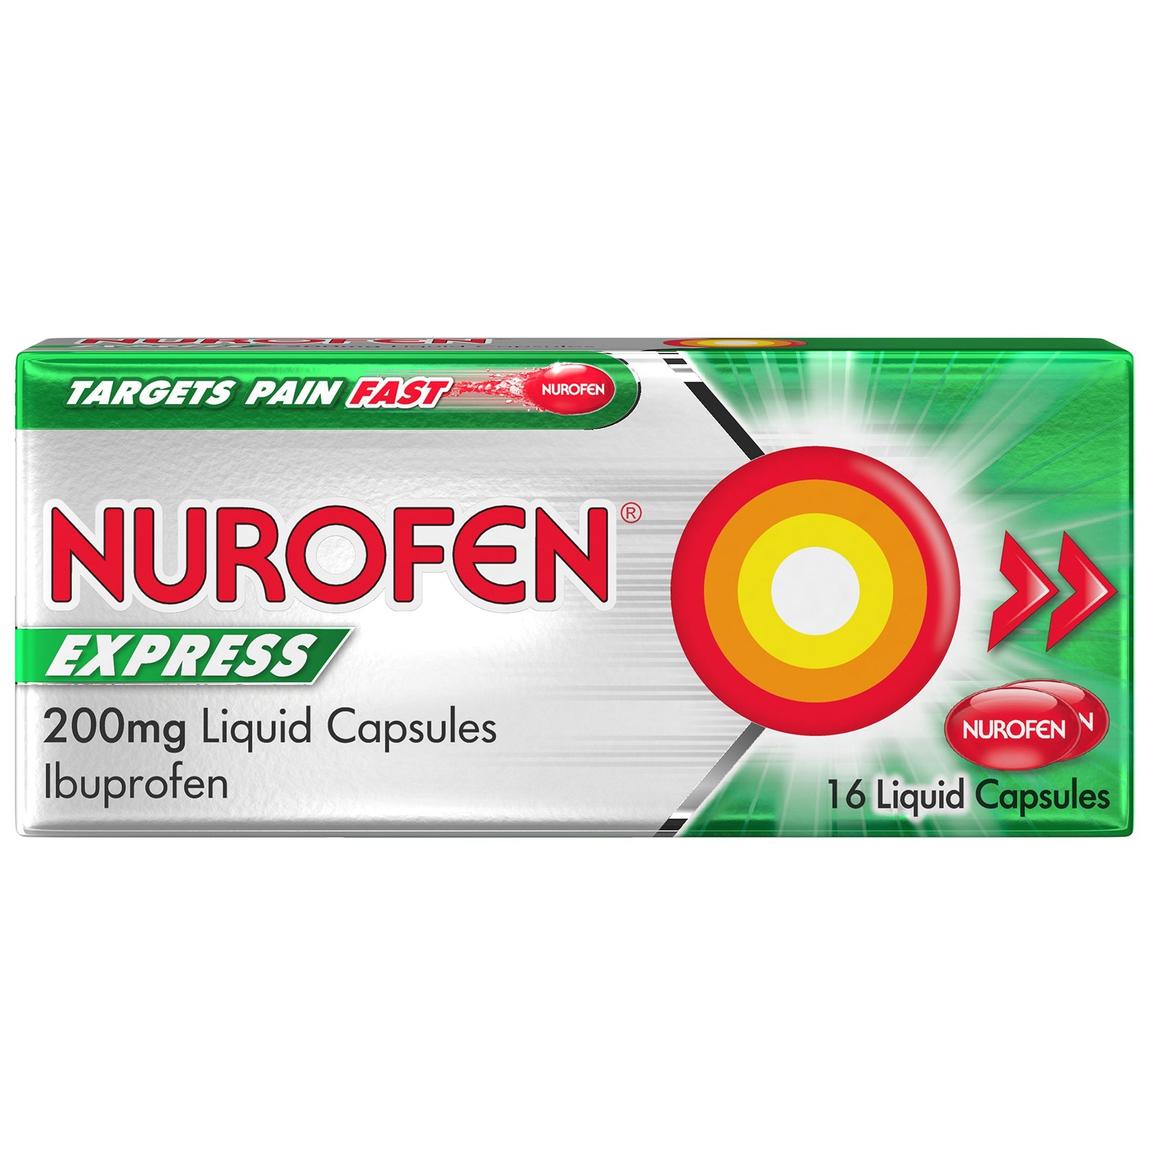 Nurofen express 200mg liquid capsules offers at £429 in Lloyds Pharmacy